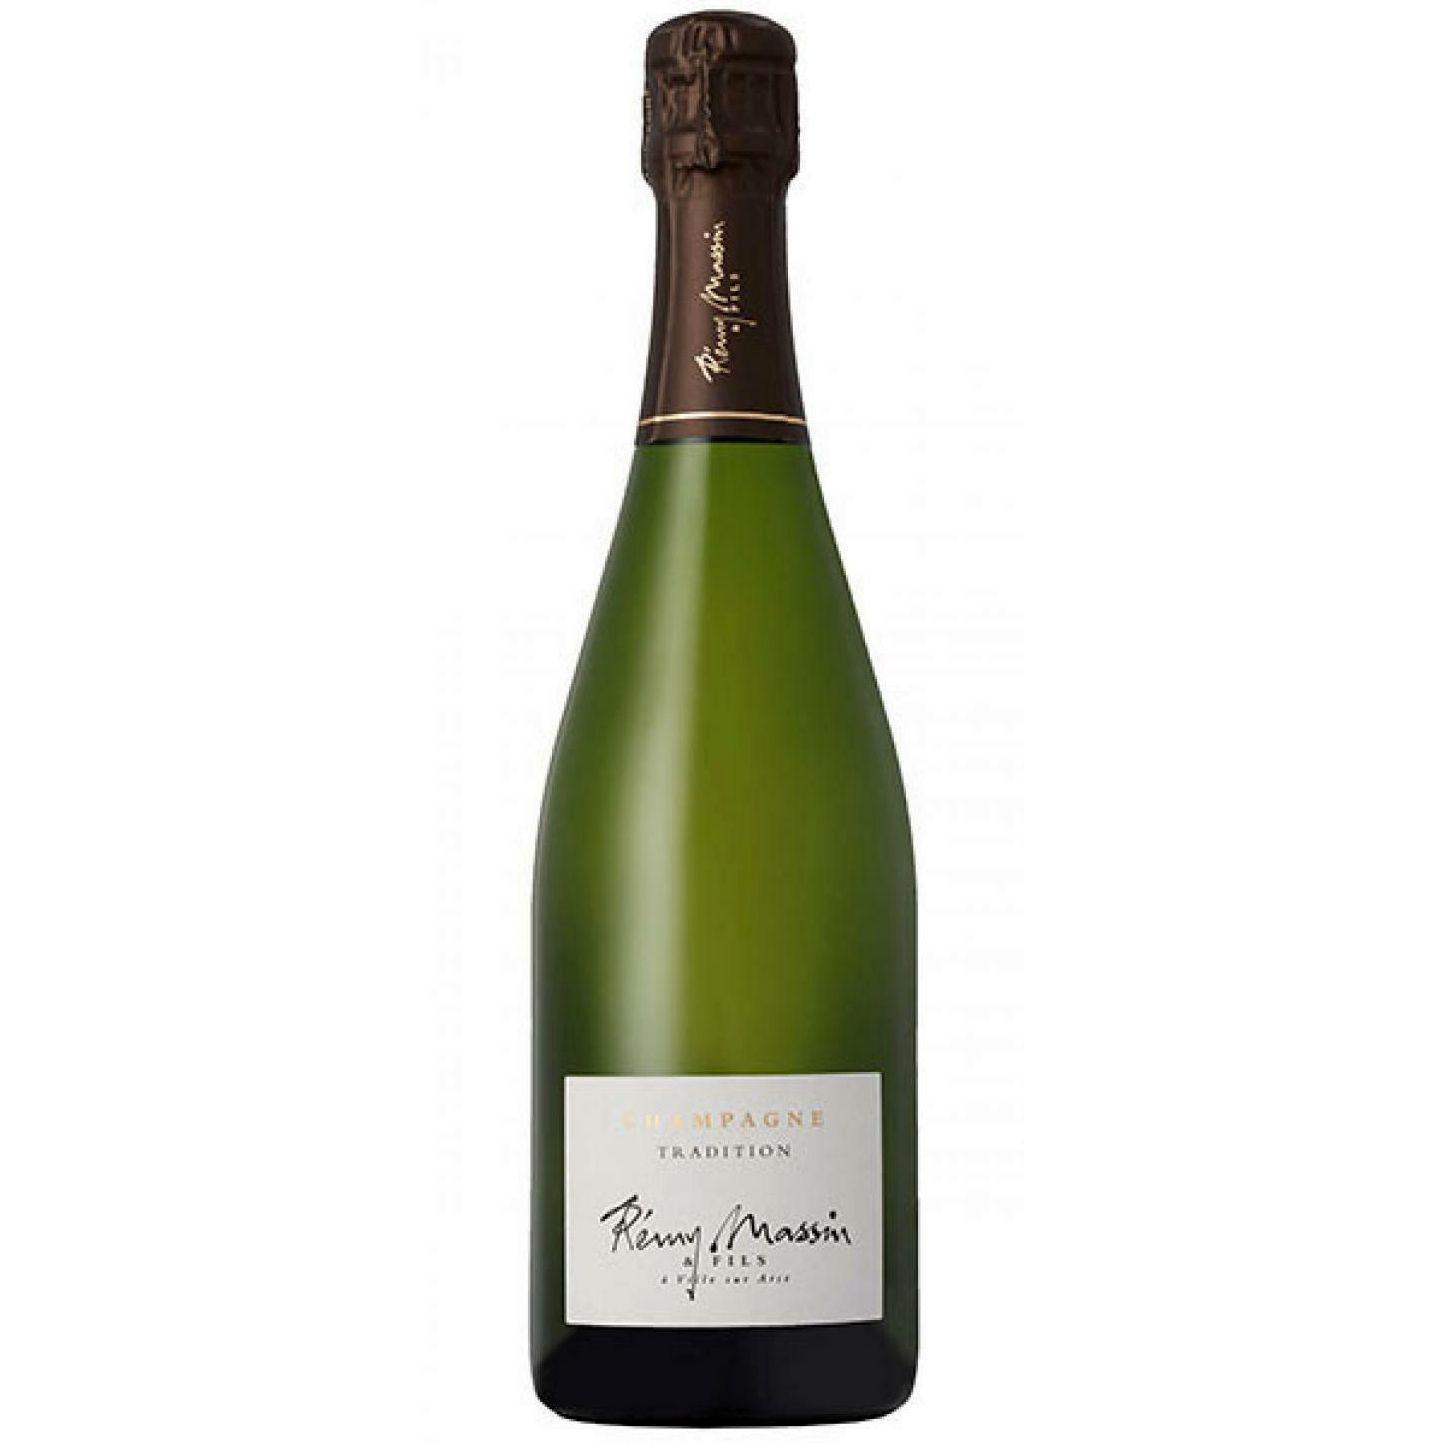 remy massin champagne brut tradition